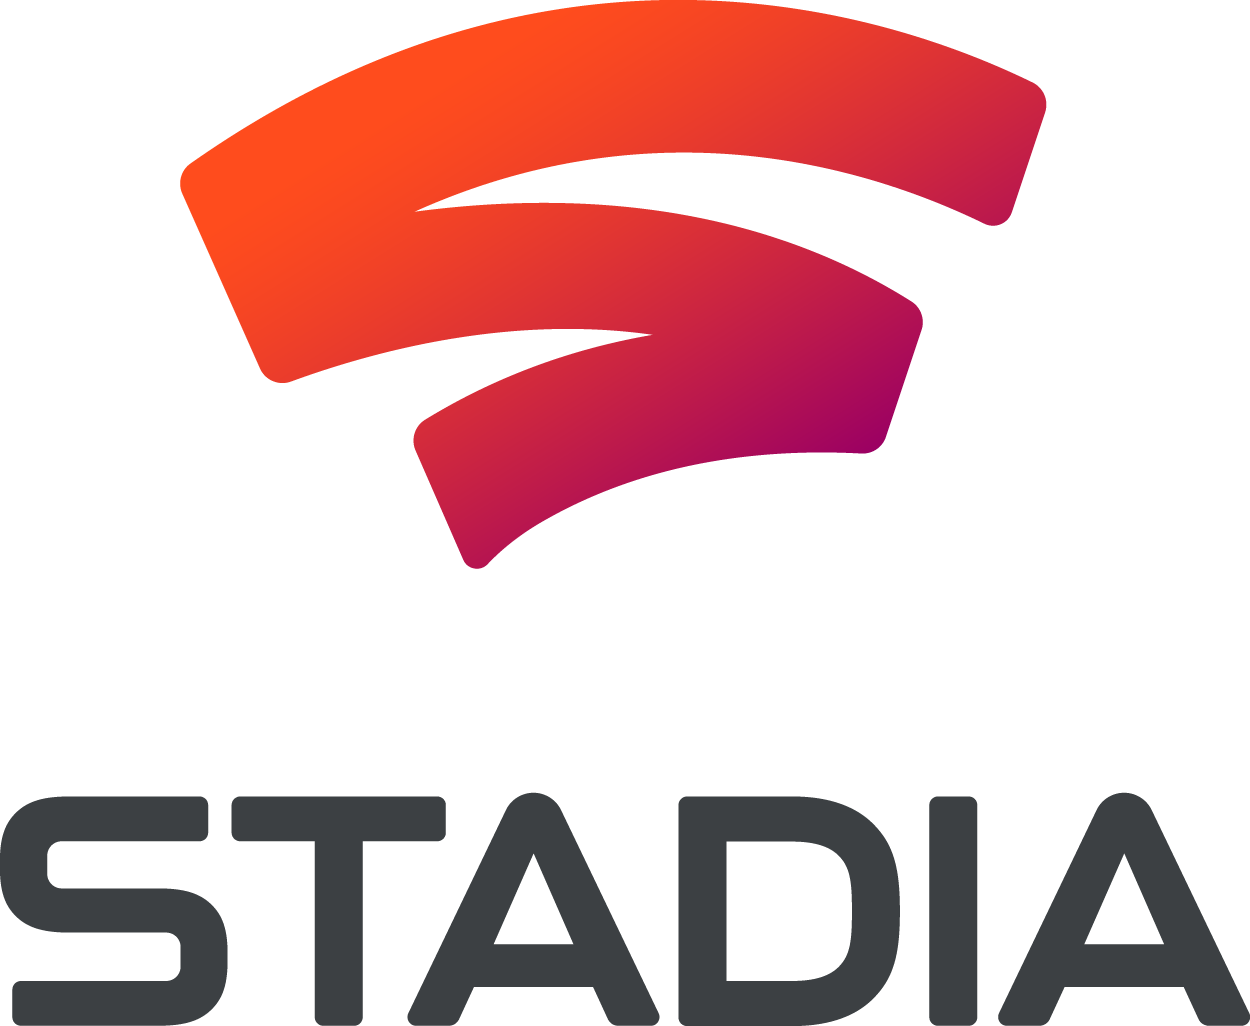 Google Stadia is fully dead, white label service has shut down